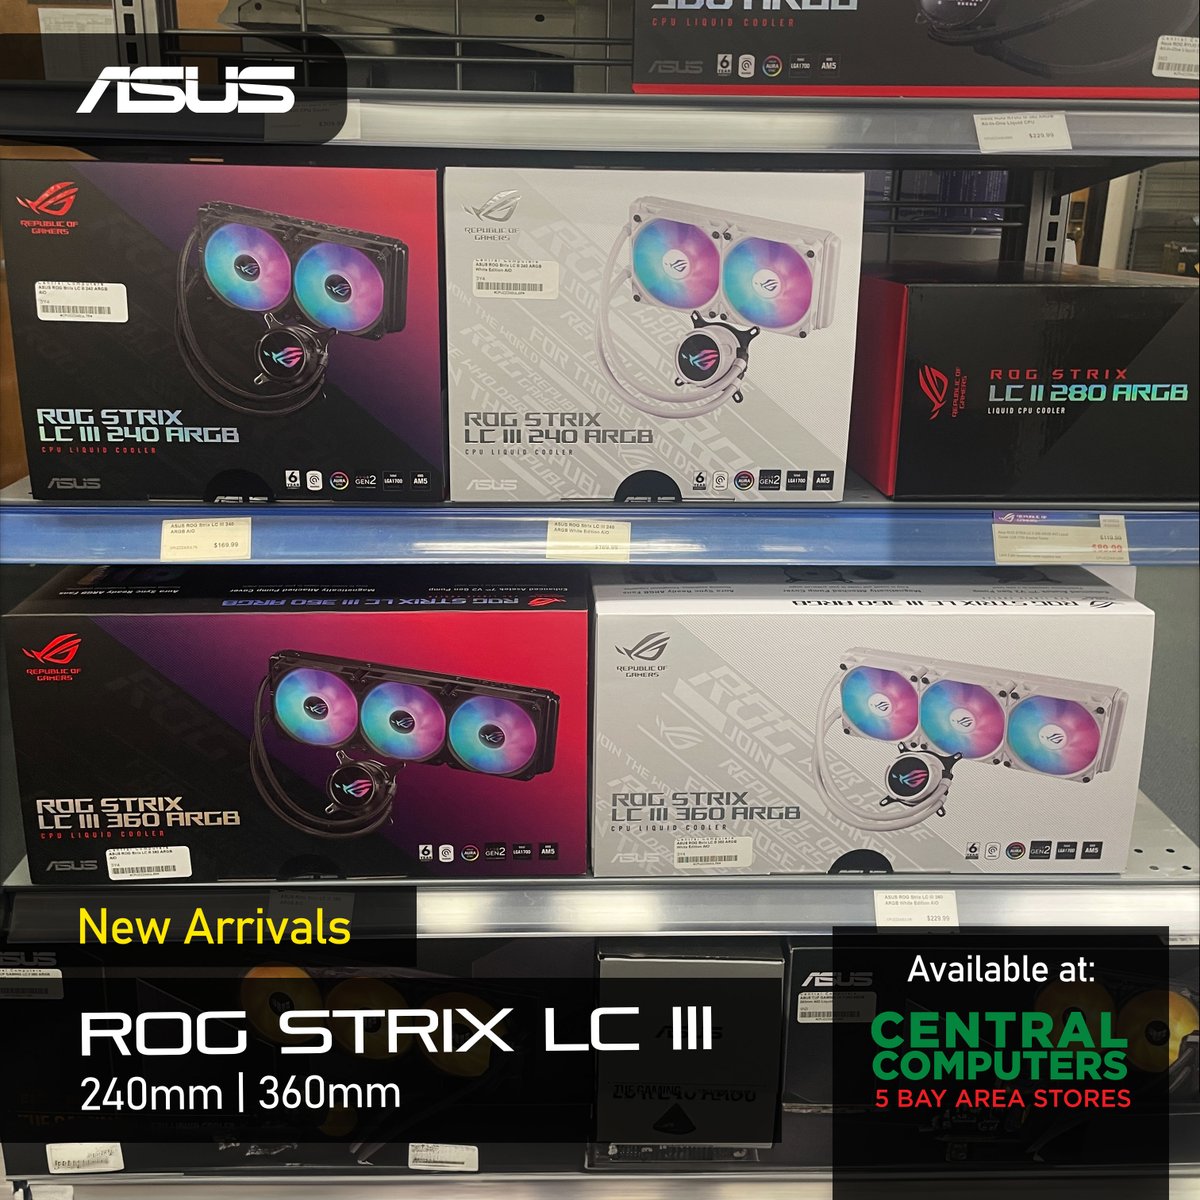 New arrival: Asus ROG Strix LC III AIO Coolers
Featuring a 360° rotatable, magnetic water block for flexible installation and an LCD screen to display system stats or custom animations. 

Make it uniquely yours:
ow.ly/POj050RiC6N

#pc #asus #asusrog #aio #pccooler #argb